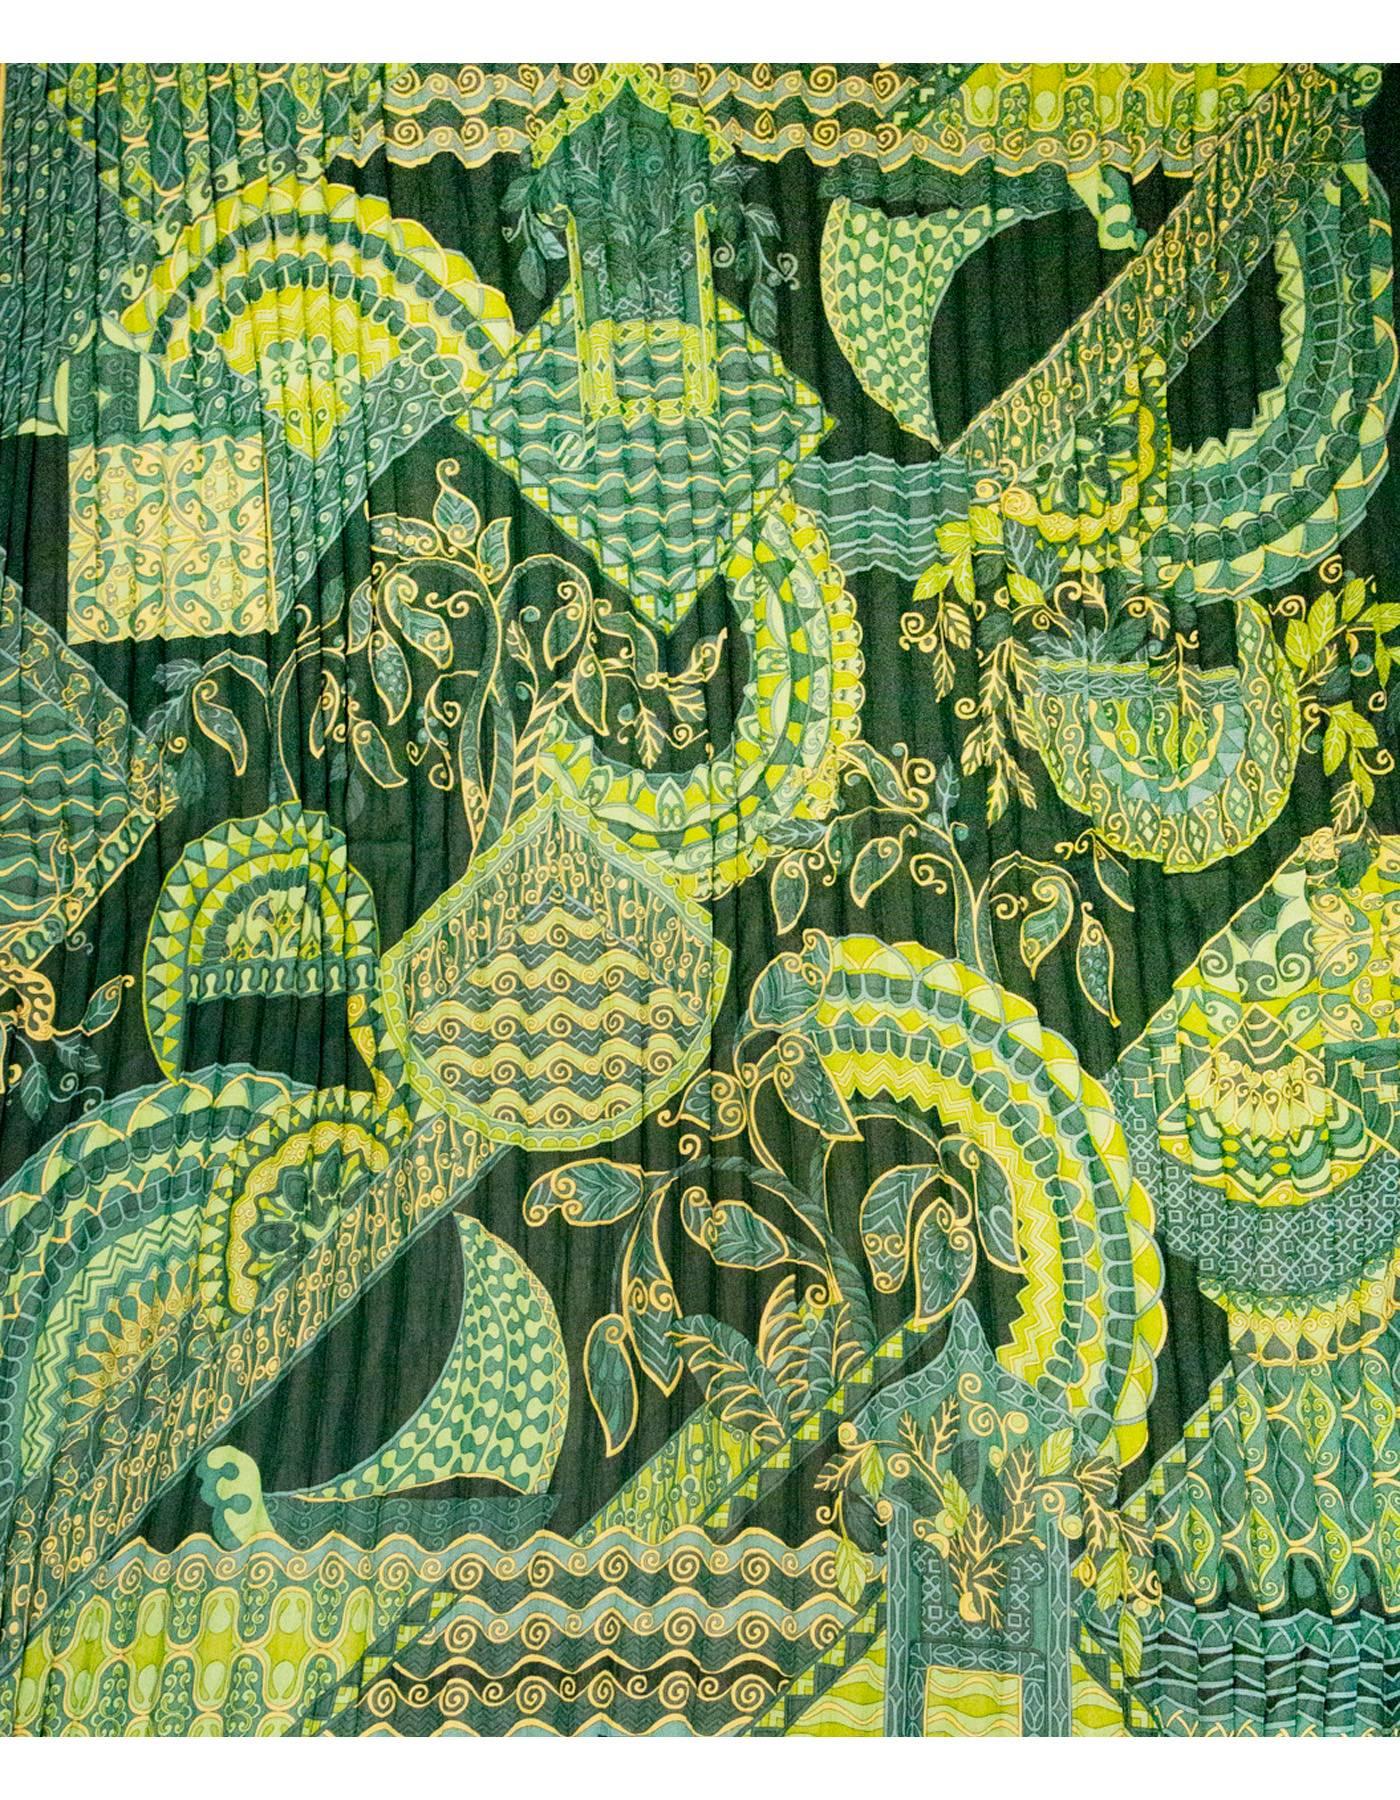 Salvatore Ferragamo Green & Gold Micro Pleated Silk Scarf 
Features leaf designs printed throughout

Made In: Italy
Color: Green and gold
Composition: 100% silk
Overall Condition: Excellent pre-owned condition
Measurements: 
Length: